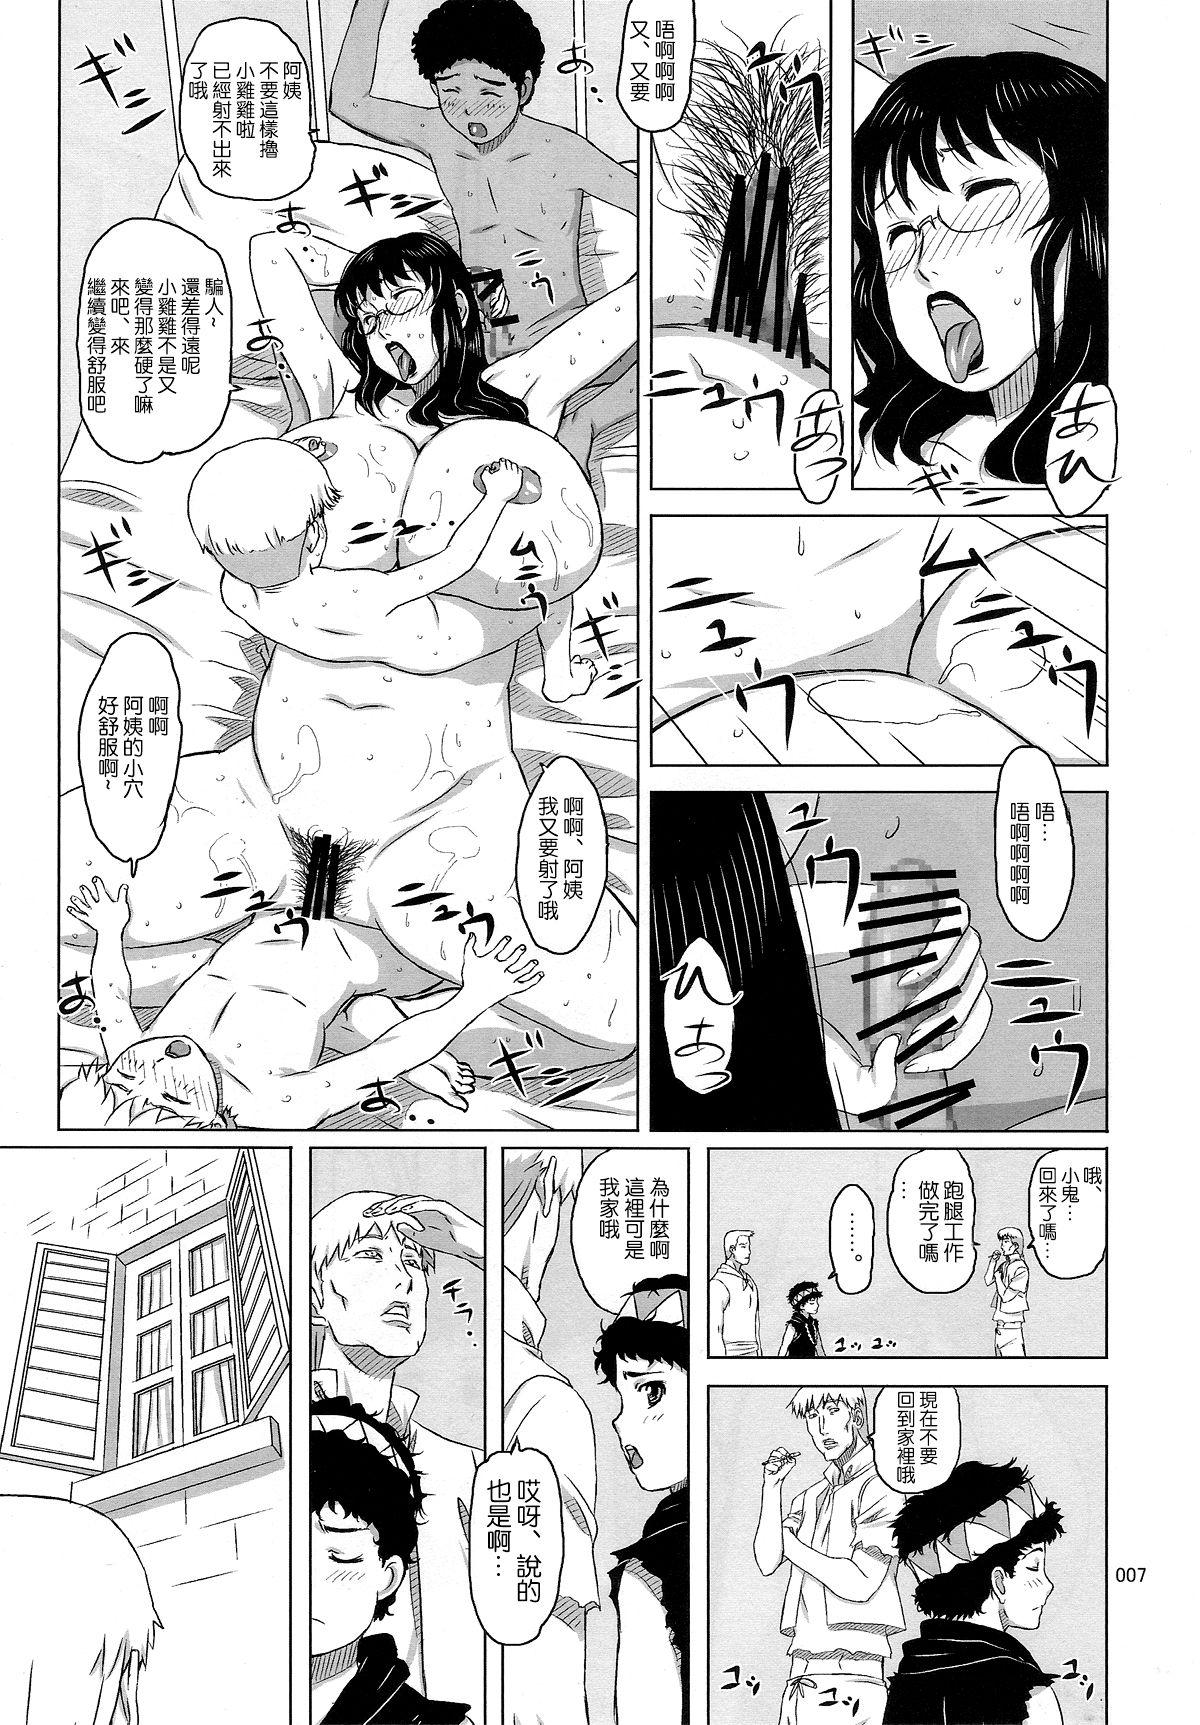 Holes Package Meat 1.5 - Queens blade Nurse - Page 4